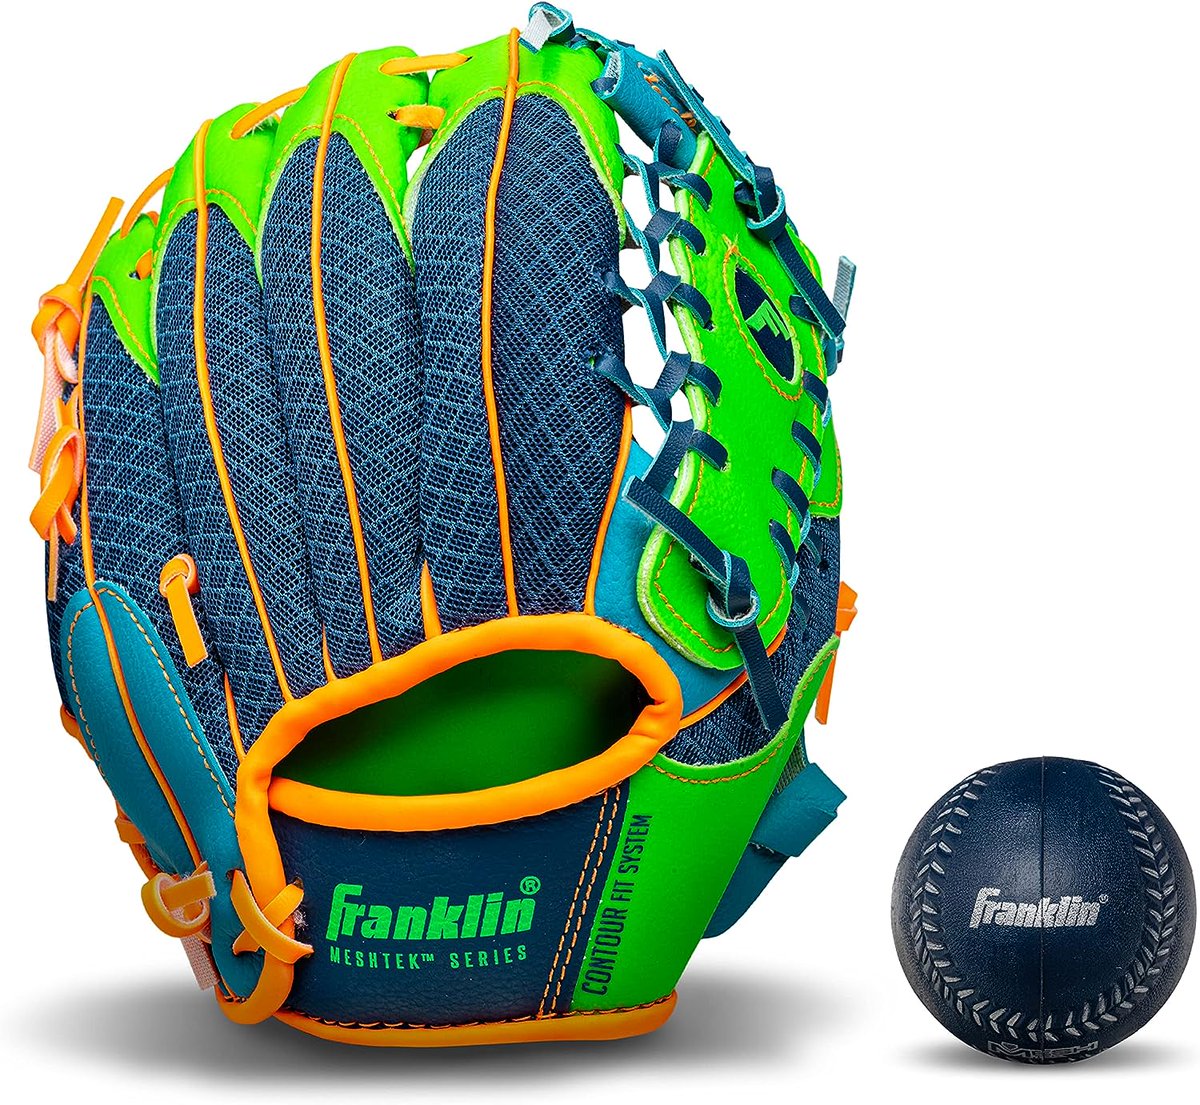 Get ready to catch some fun with the Franklin Sports Teeball Glove! ⚾️🧤 Perfect for young players learning the game, this synthetic glove offers durability and comfort. Click the link below to purchase!

amzn.to/4baXAXA

#Ad #TeeballGlove #YouthSports #BaseballGear